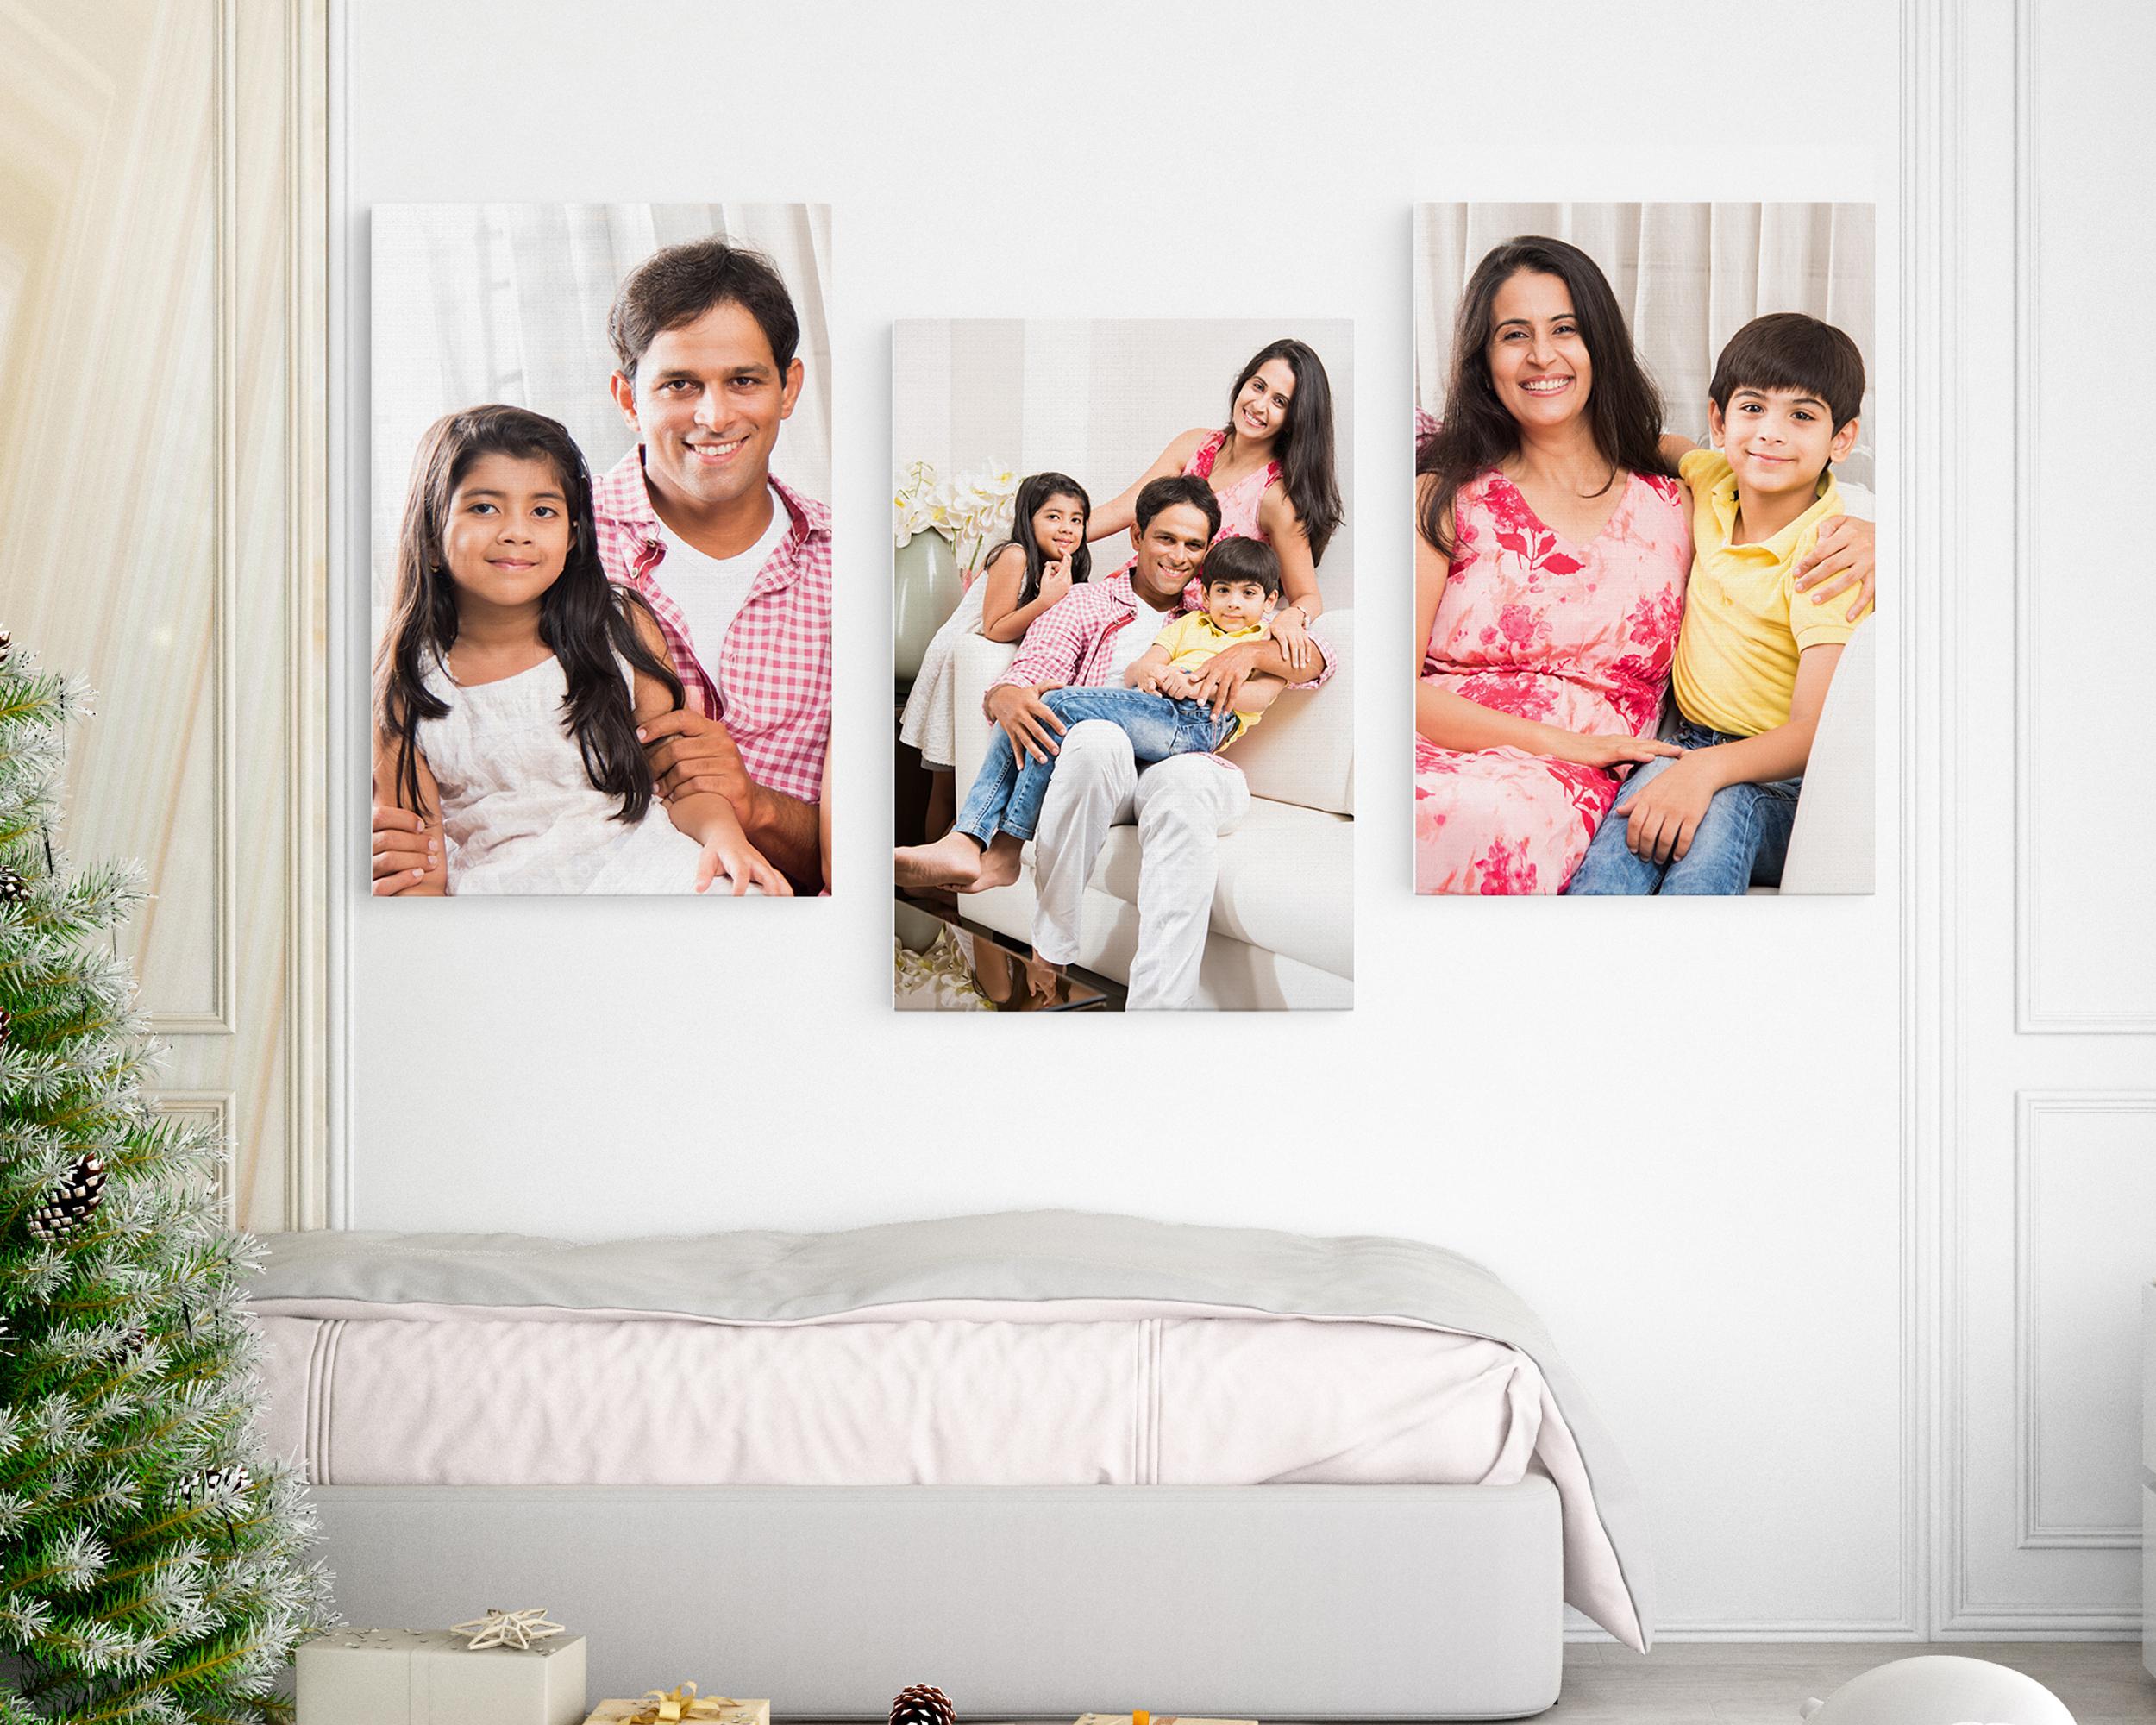 Printing Photos on Canvas is a New Way to Print Photos.